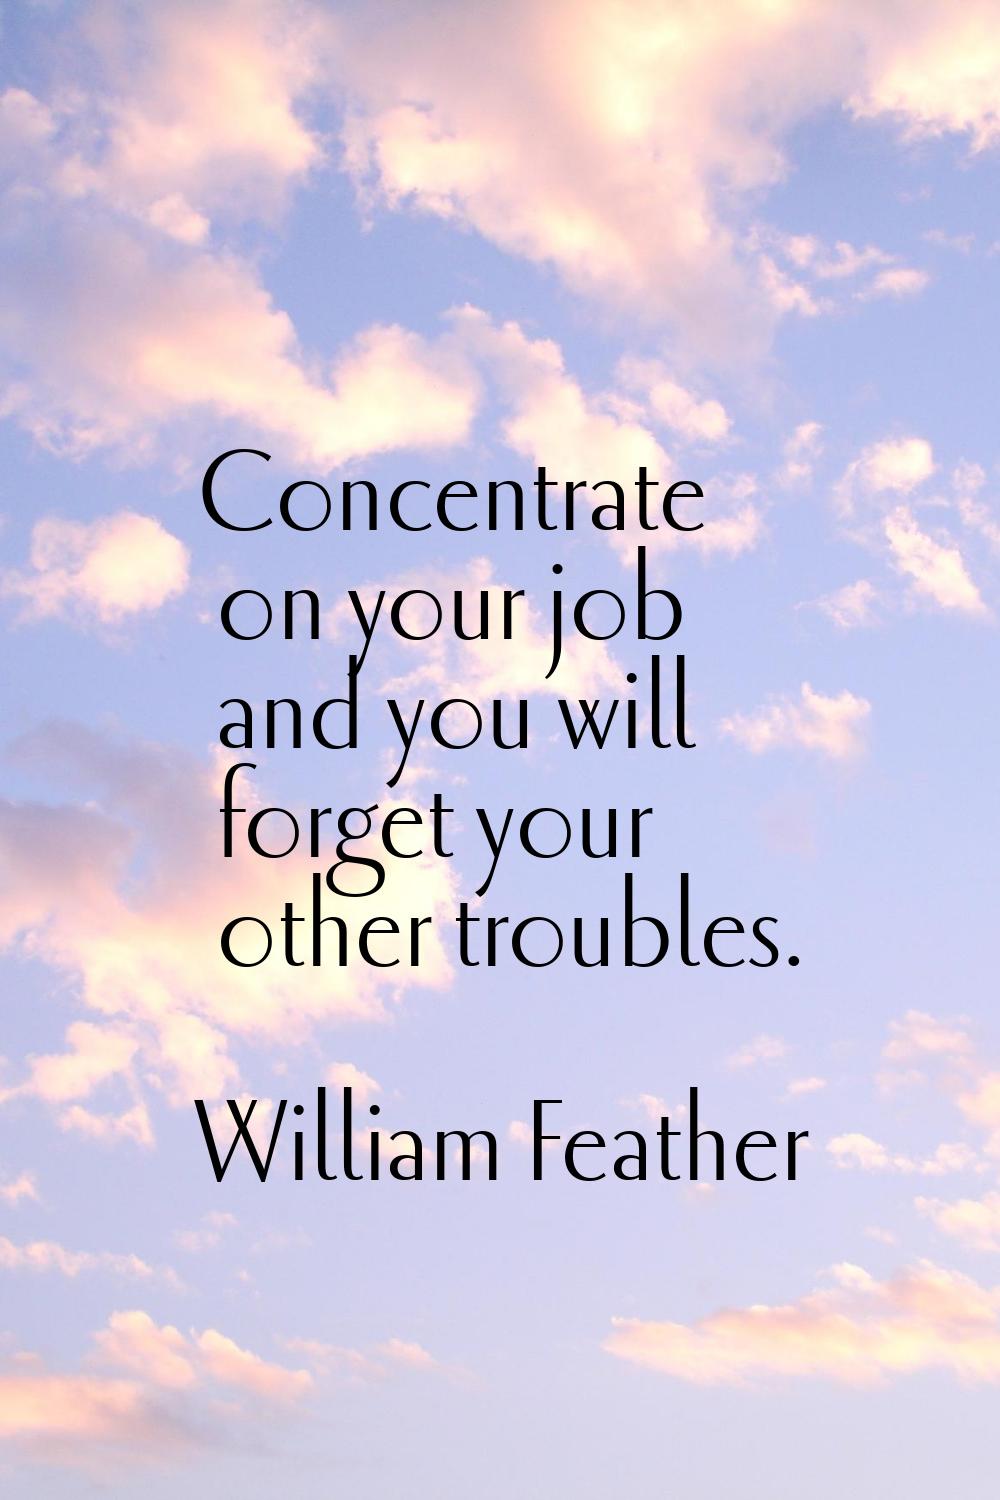 Concentrate on your job and you will forget your other troubles.